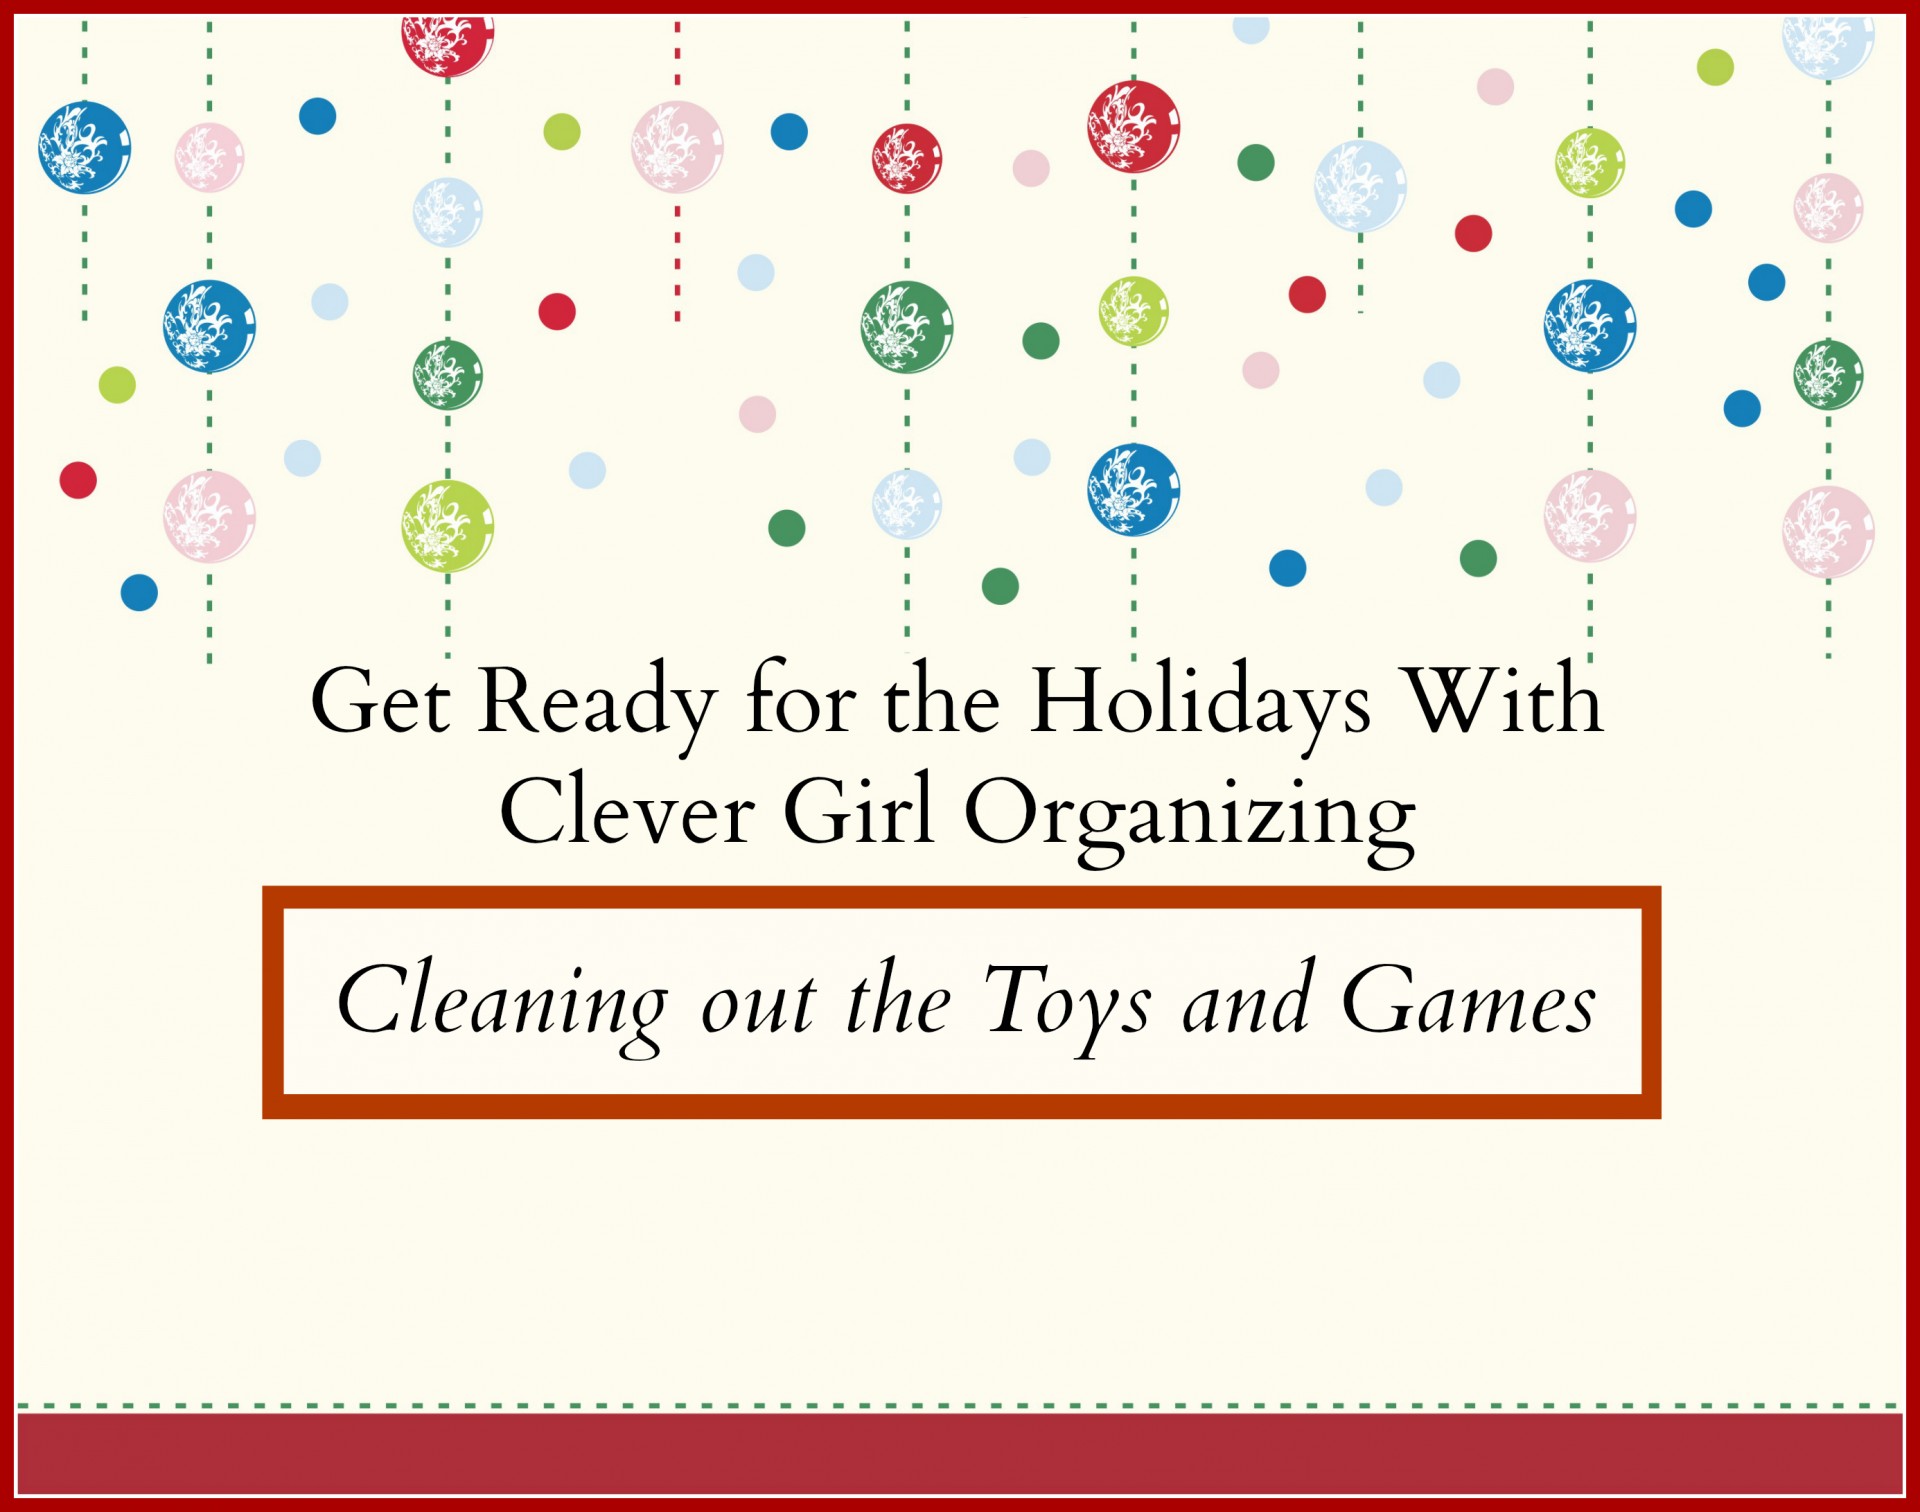 Get Ready for the Holidays: Out with the old, Get ready for the new… TOYS!